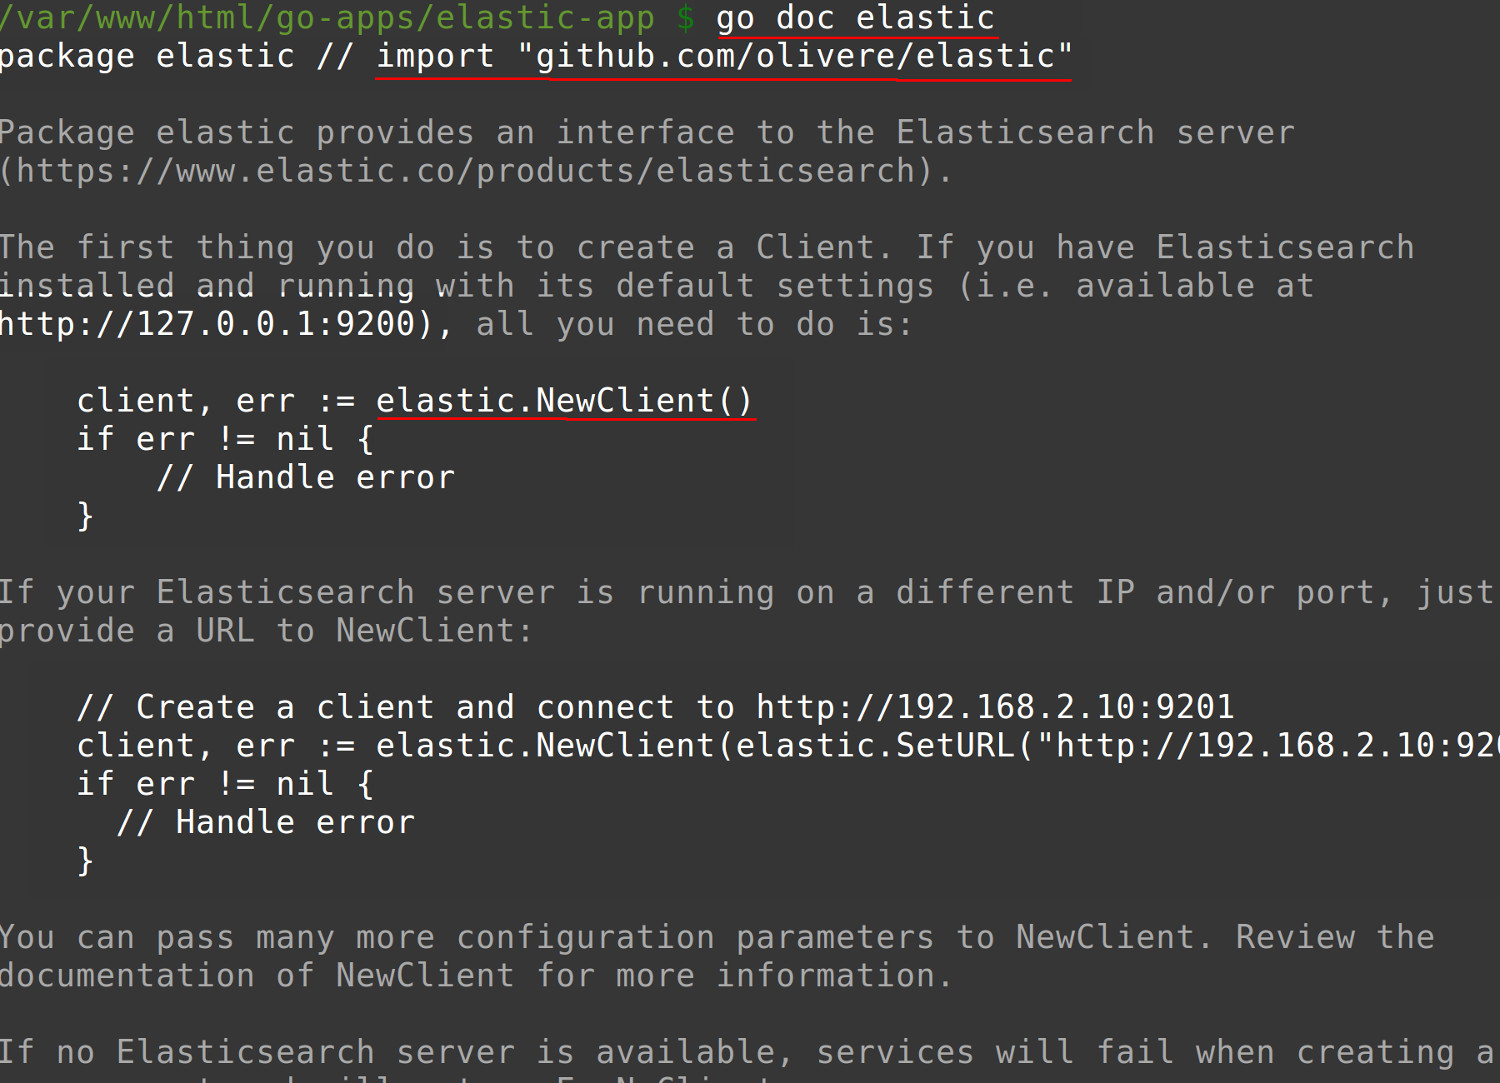 Terminal screenshot of the Golang go doc command to return information about the Olivere Elastic package